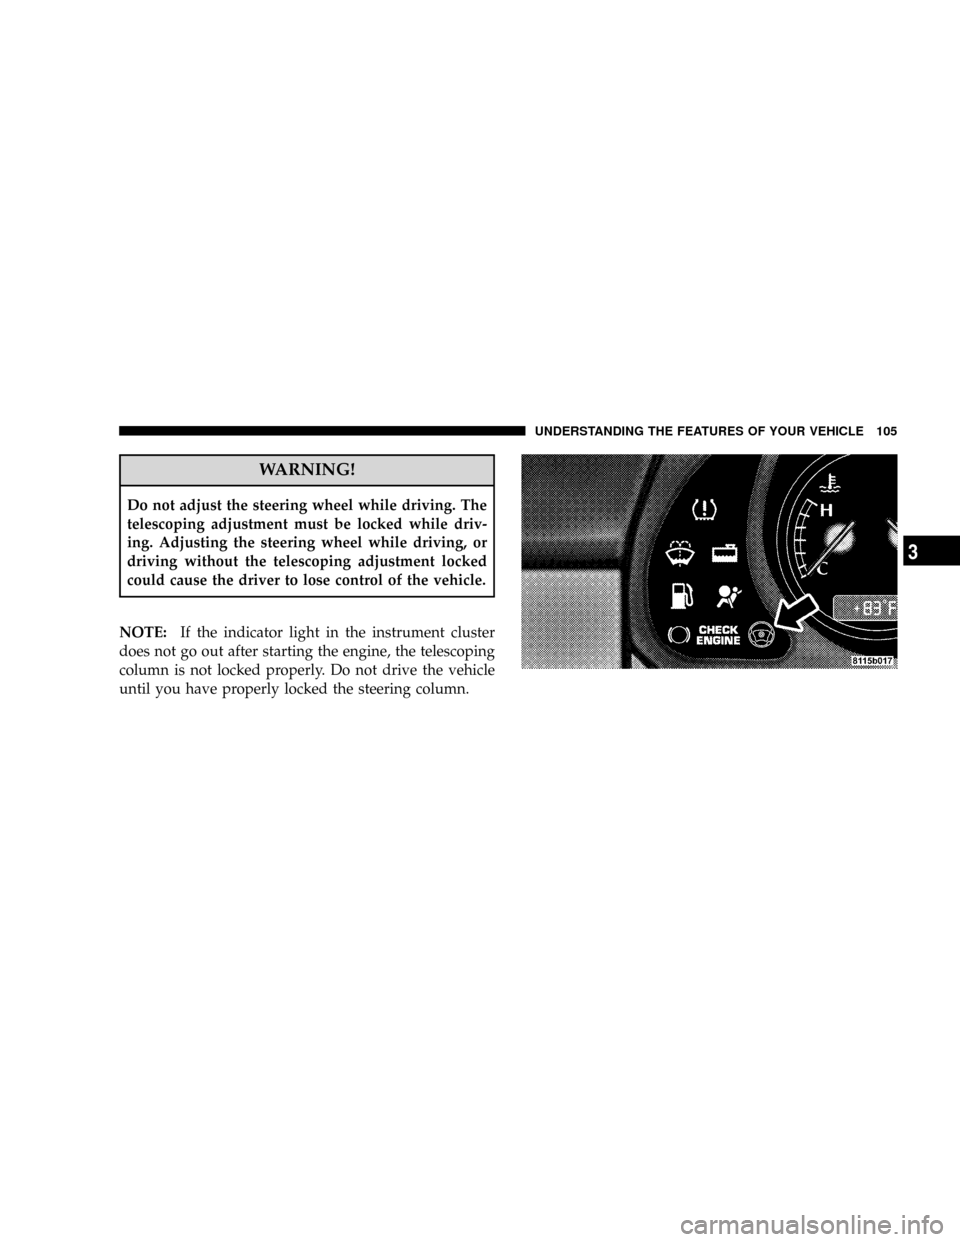 CHRYSLER CROSSFIRE 2008 1.G Owners Manual WARNING!
Do not adjust the steering wheel while driving. The
telescoping adjustment must be locked while driv-
ing. Adjusting the steering wheel while driving, or
driving without the telescoping adjus